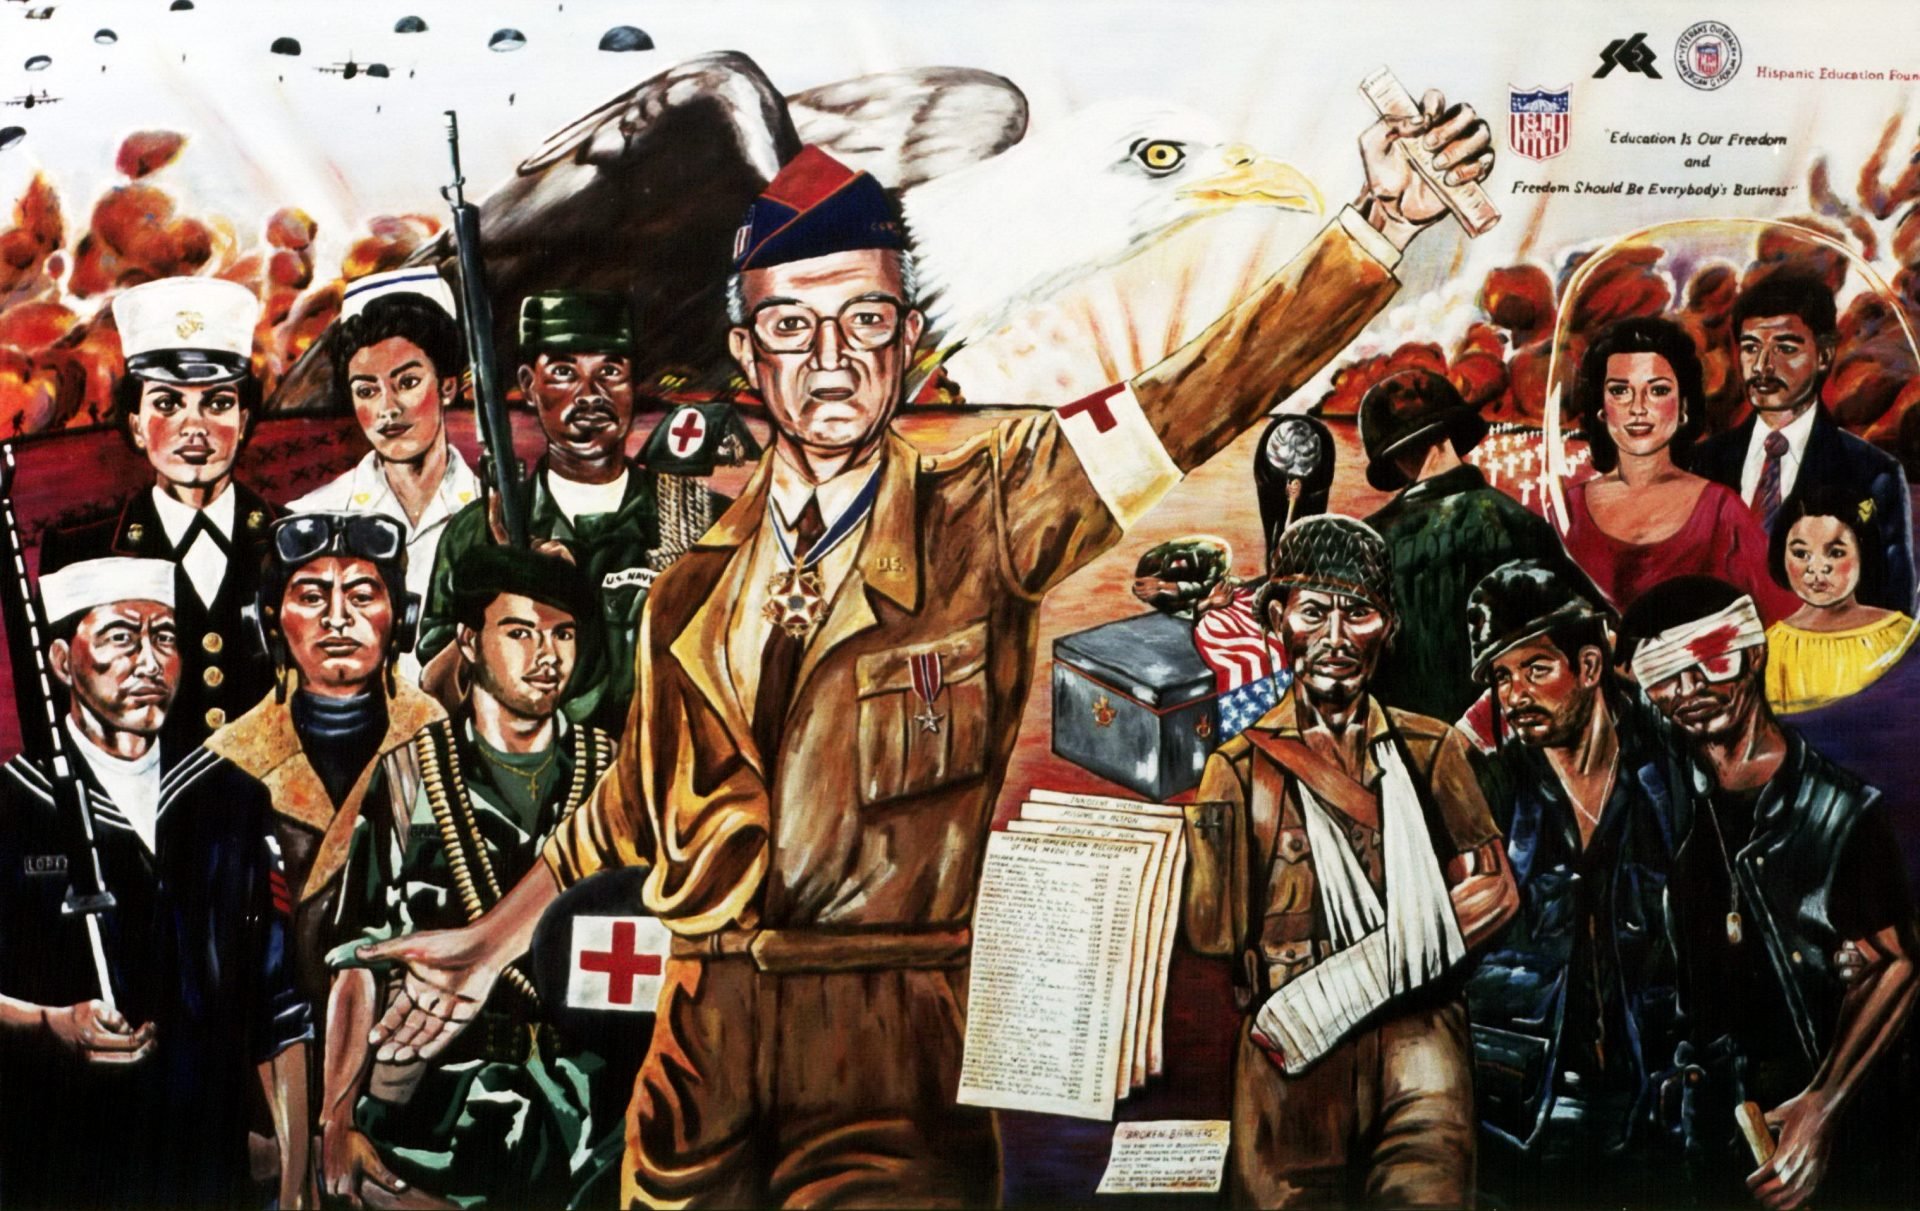 A mural depicting various Mexican-American Veterans and Héctor P. García advocating for their rights . The figures are in different styles and wear different types of uniforms, such as military and medical. In the top right corner it reads: “Education is Our Freedom and Freedom should be Everybody's Business”.